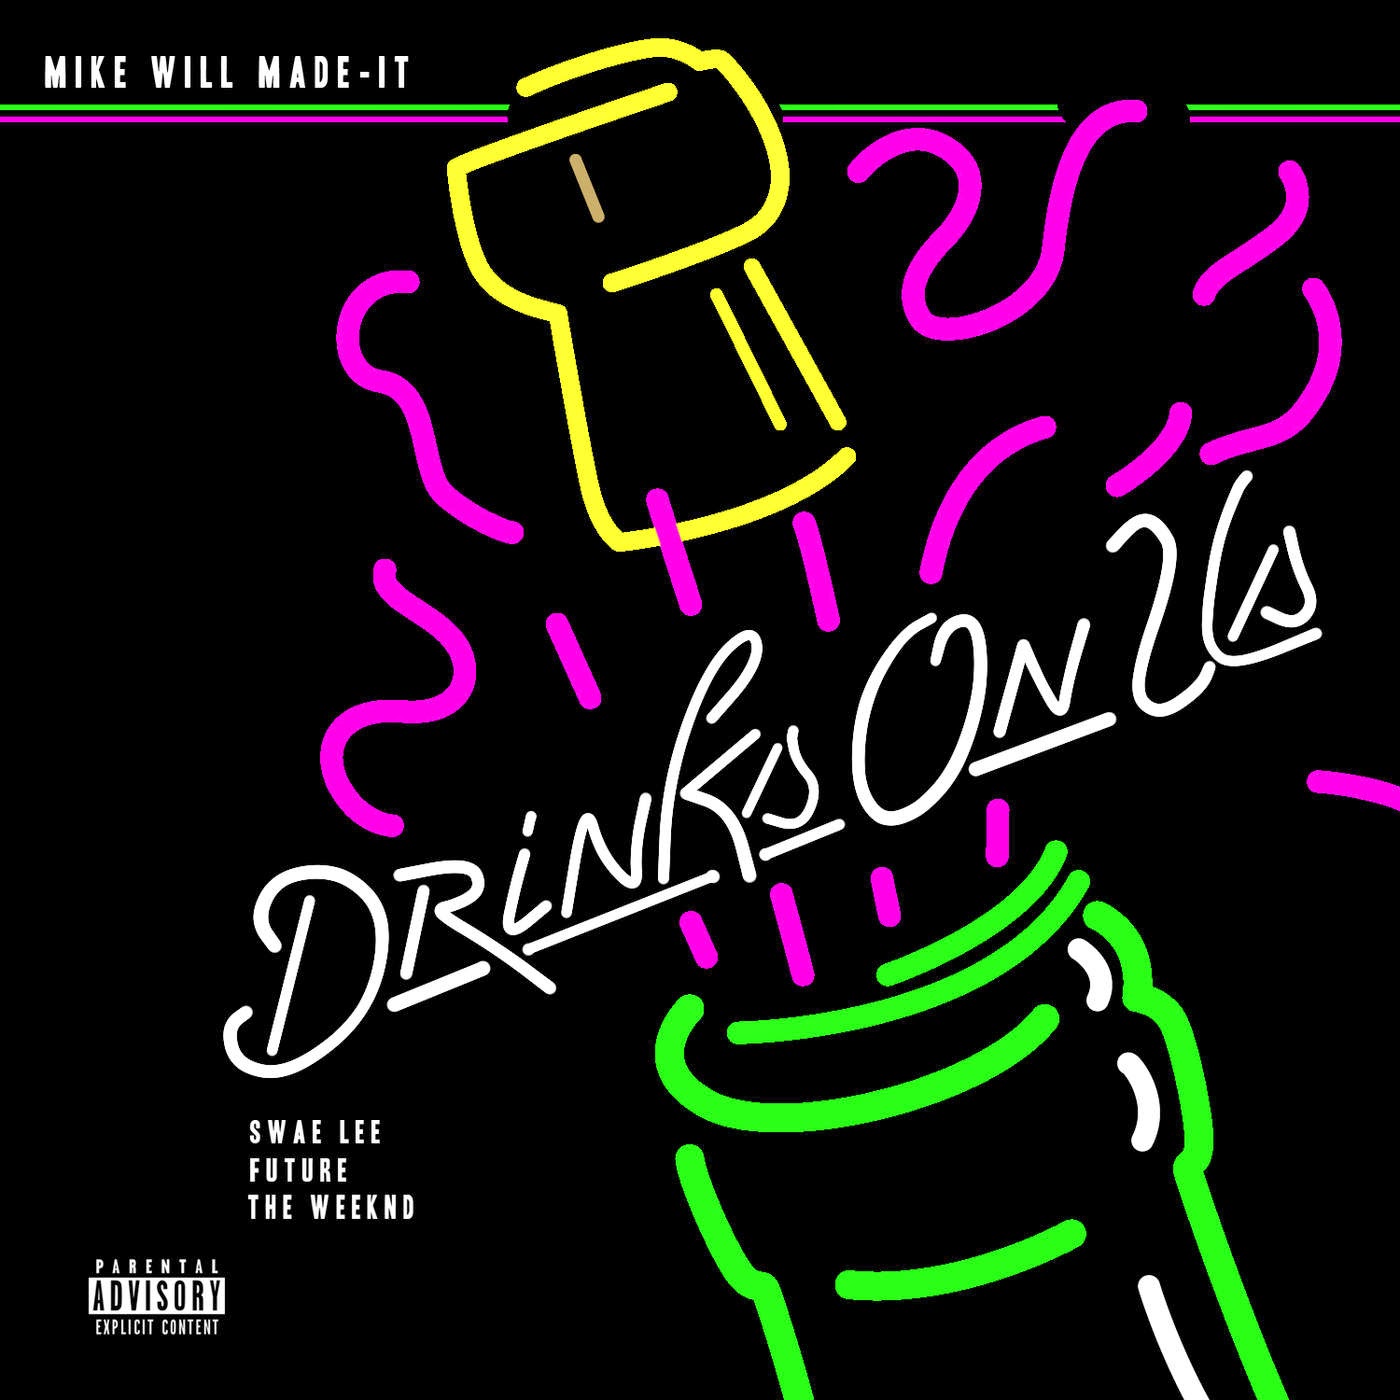 Mike WiLL Made-It ft. Future, Swae Lee & The Weeknd – ‘Drinks On Us (Remix)’